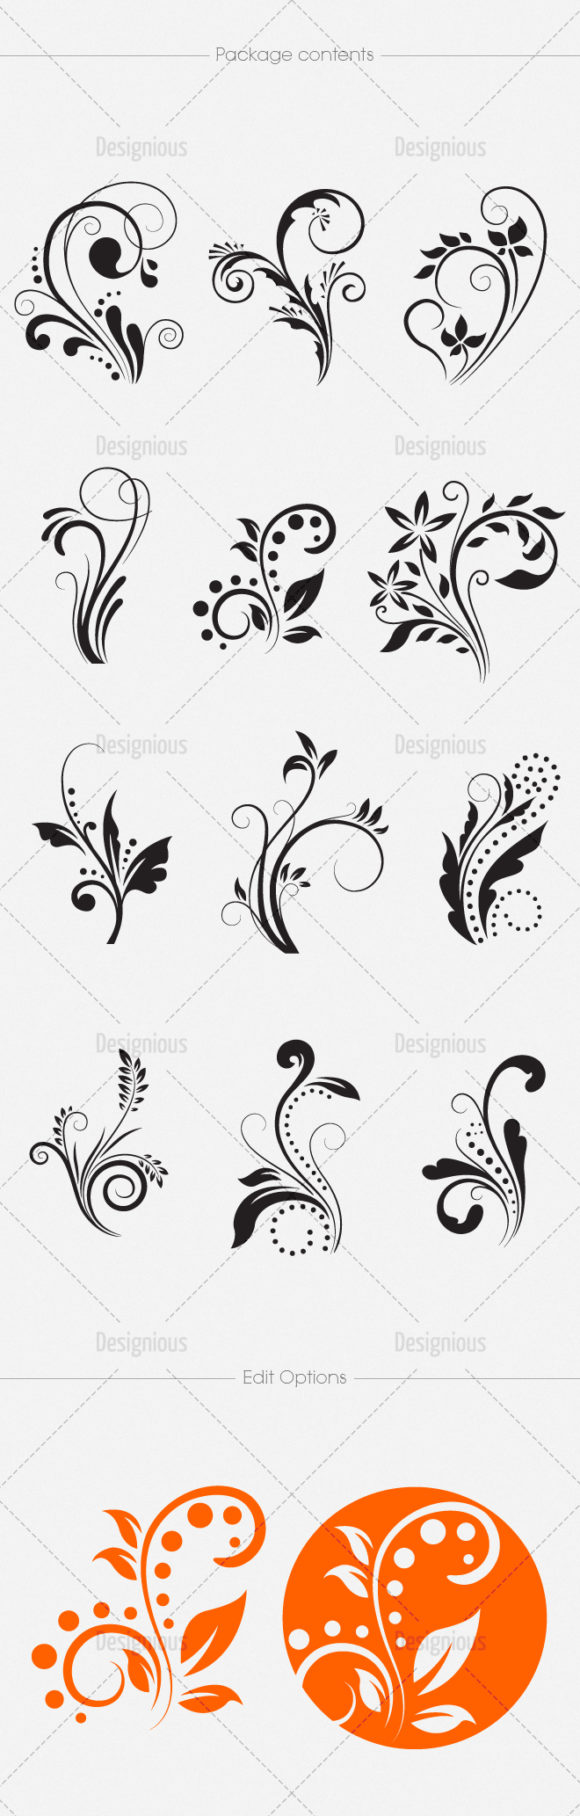 Floral Vector Pack 117 2